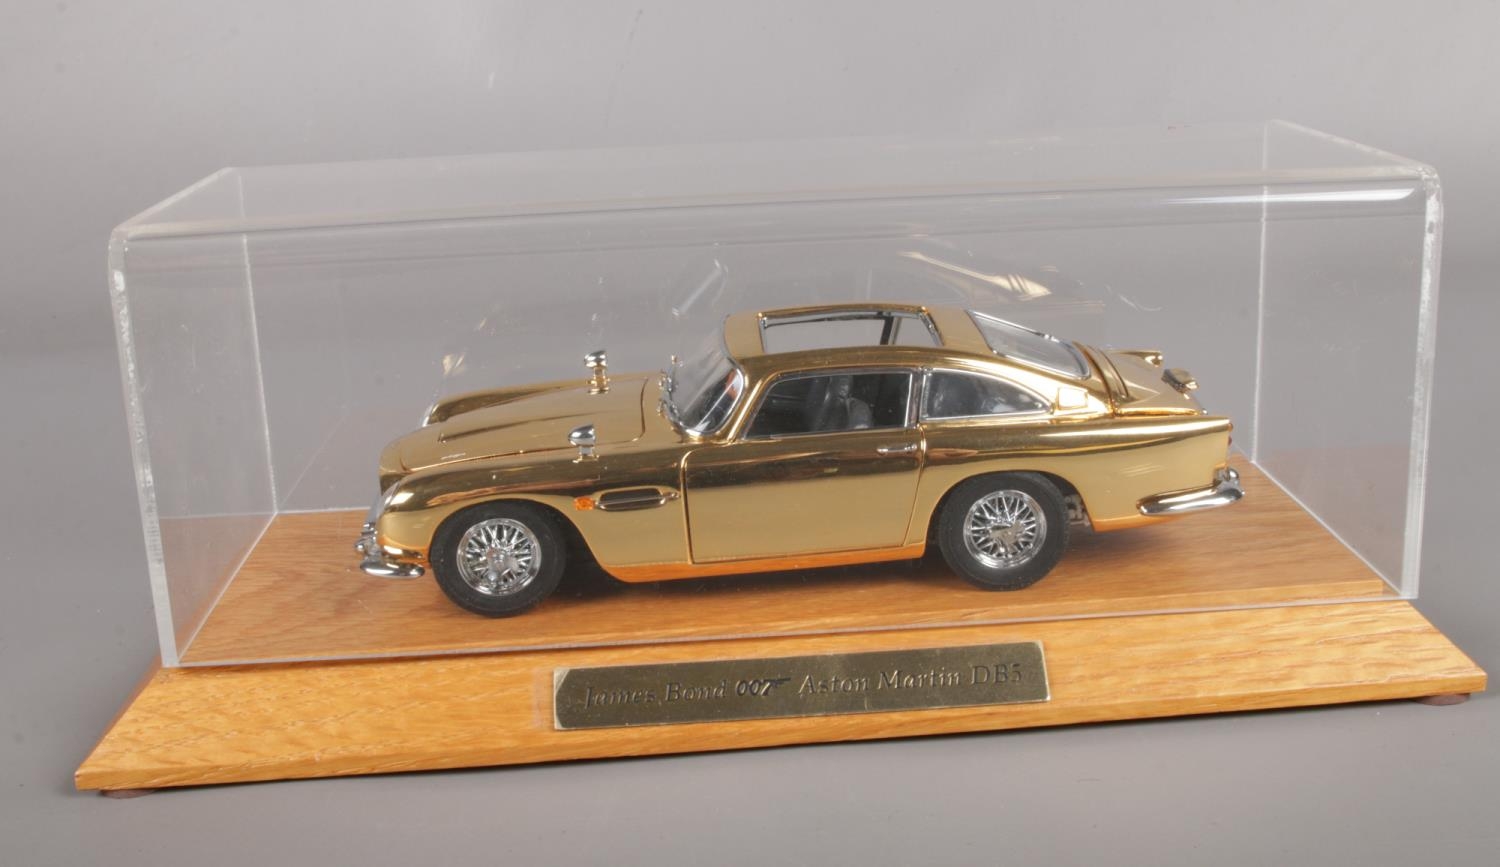 A Danbury Mint 1:24th Scale Gold Plated Finish James Bond Aston Martin DB5. In display case, box & - Image 2 of 2